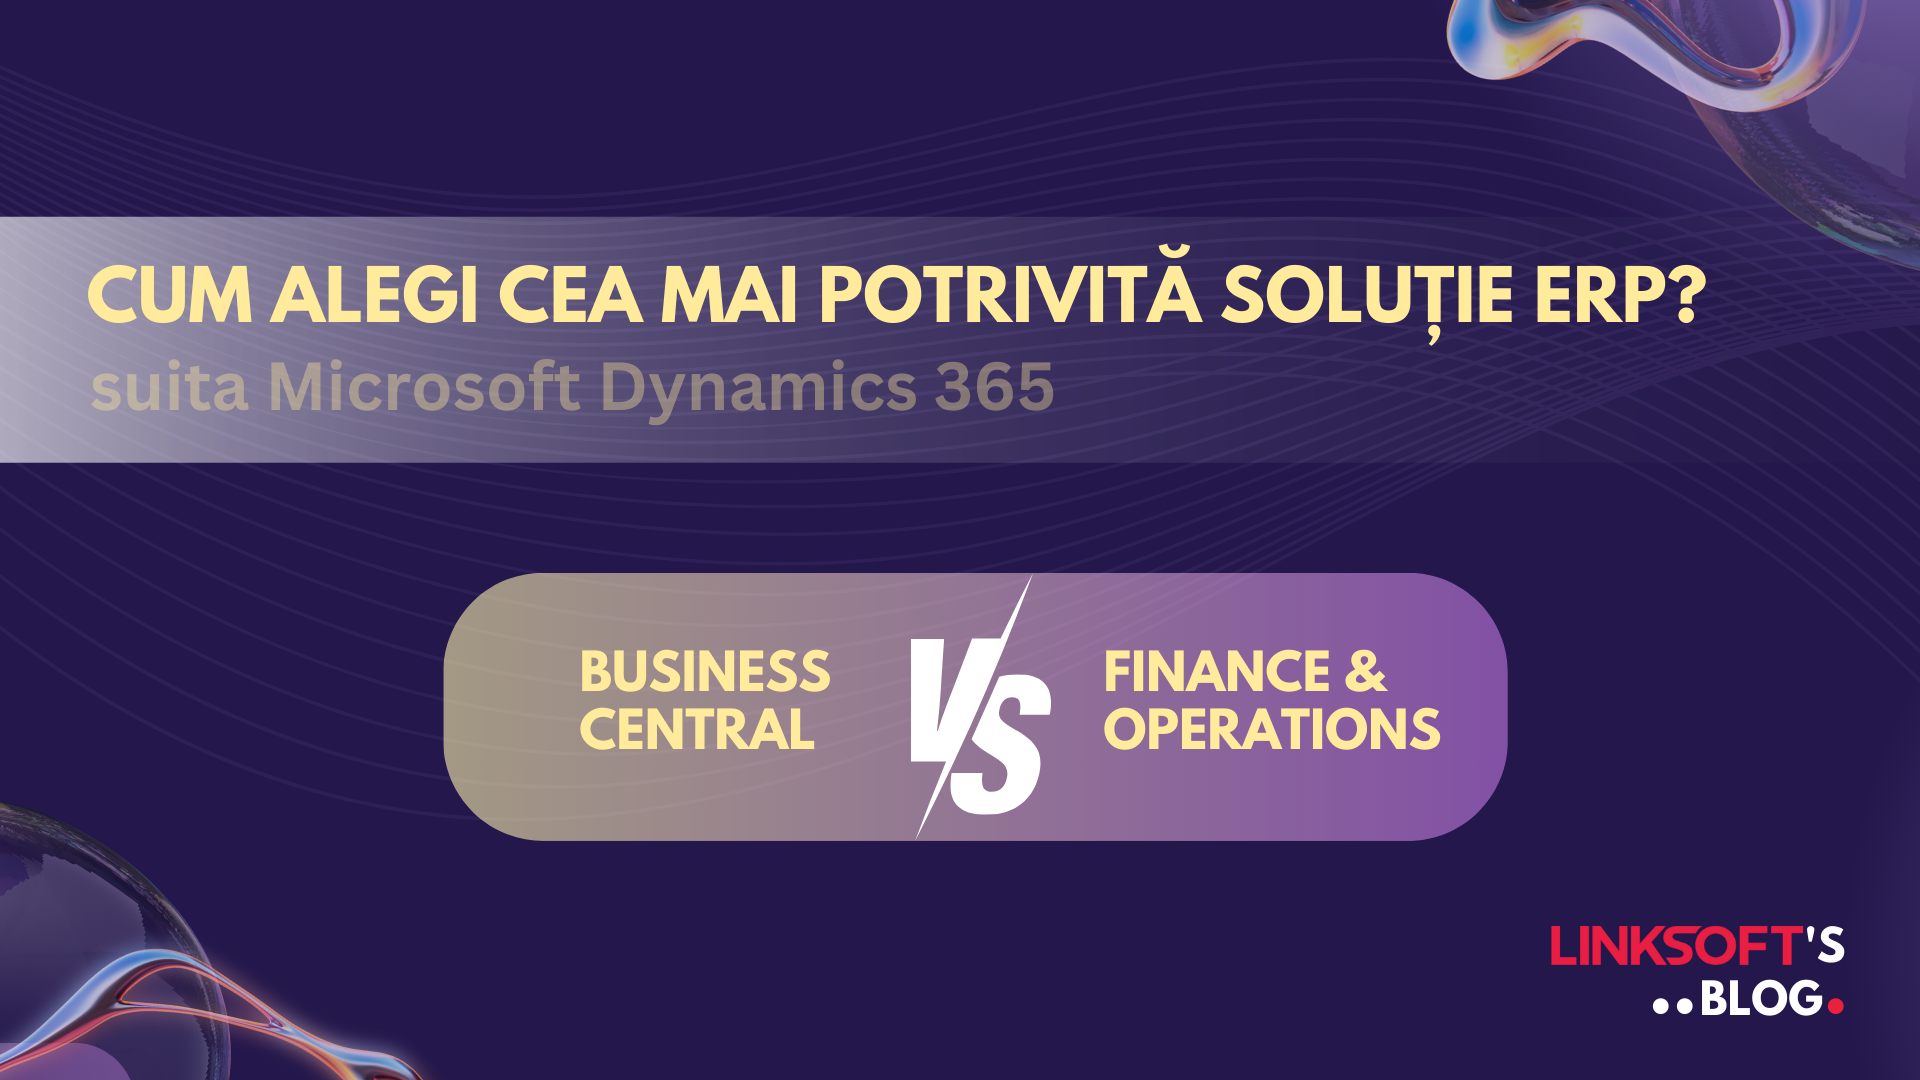 Microsoft solutie-ERP-Business-Central-VS-Finance-Operations.